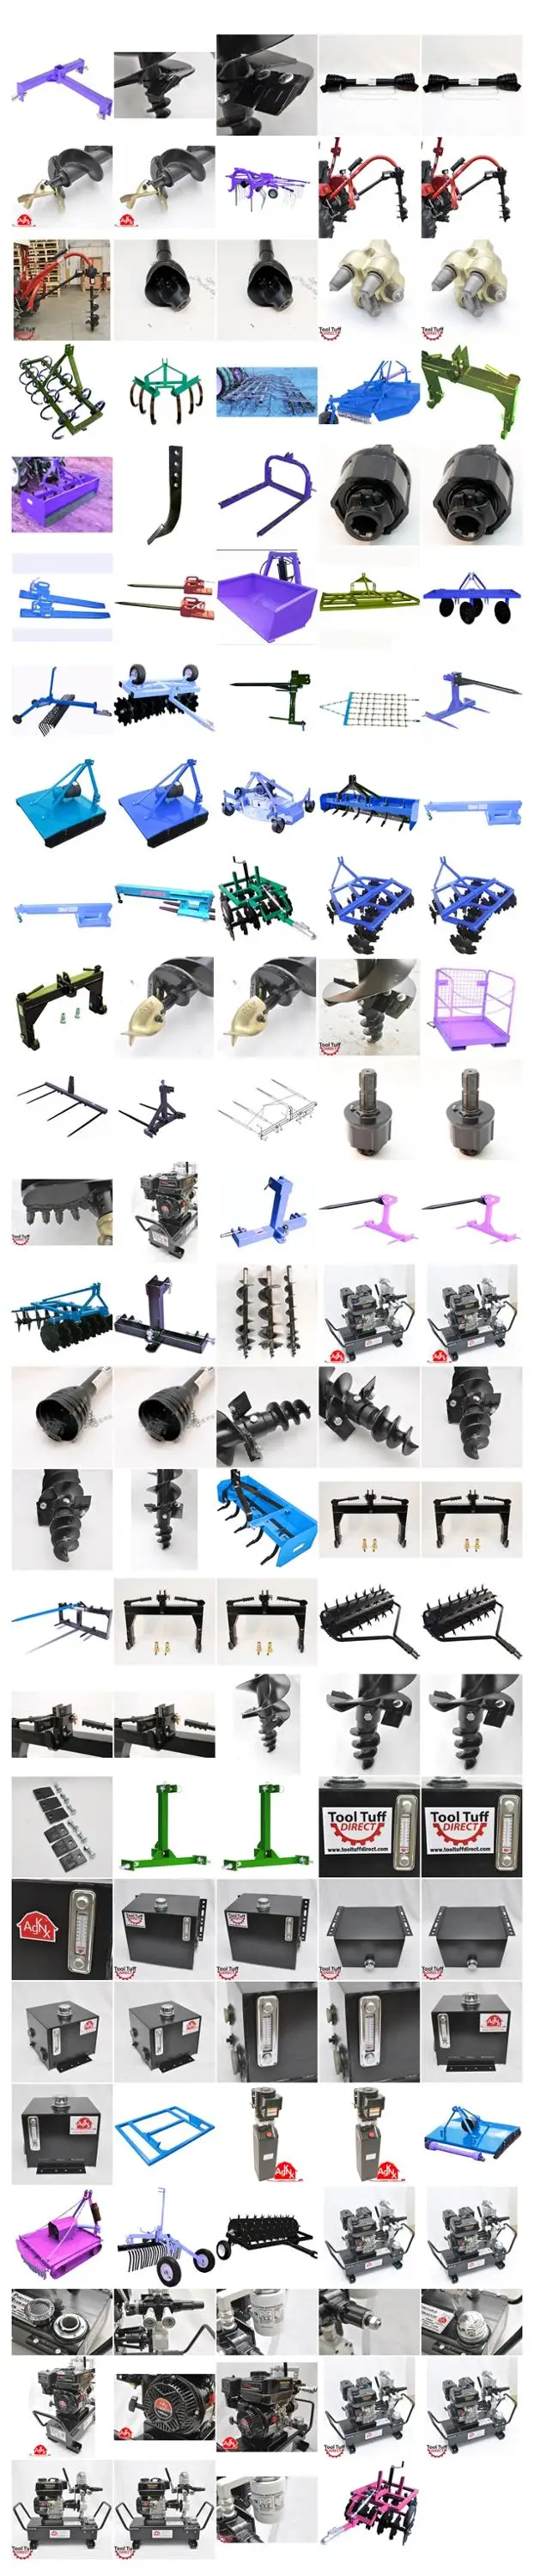 Earth Drill Machines /Earth Auger For Skid Steer Loader HYUNDAI R75-7 For Tree Planting